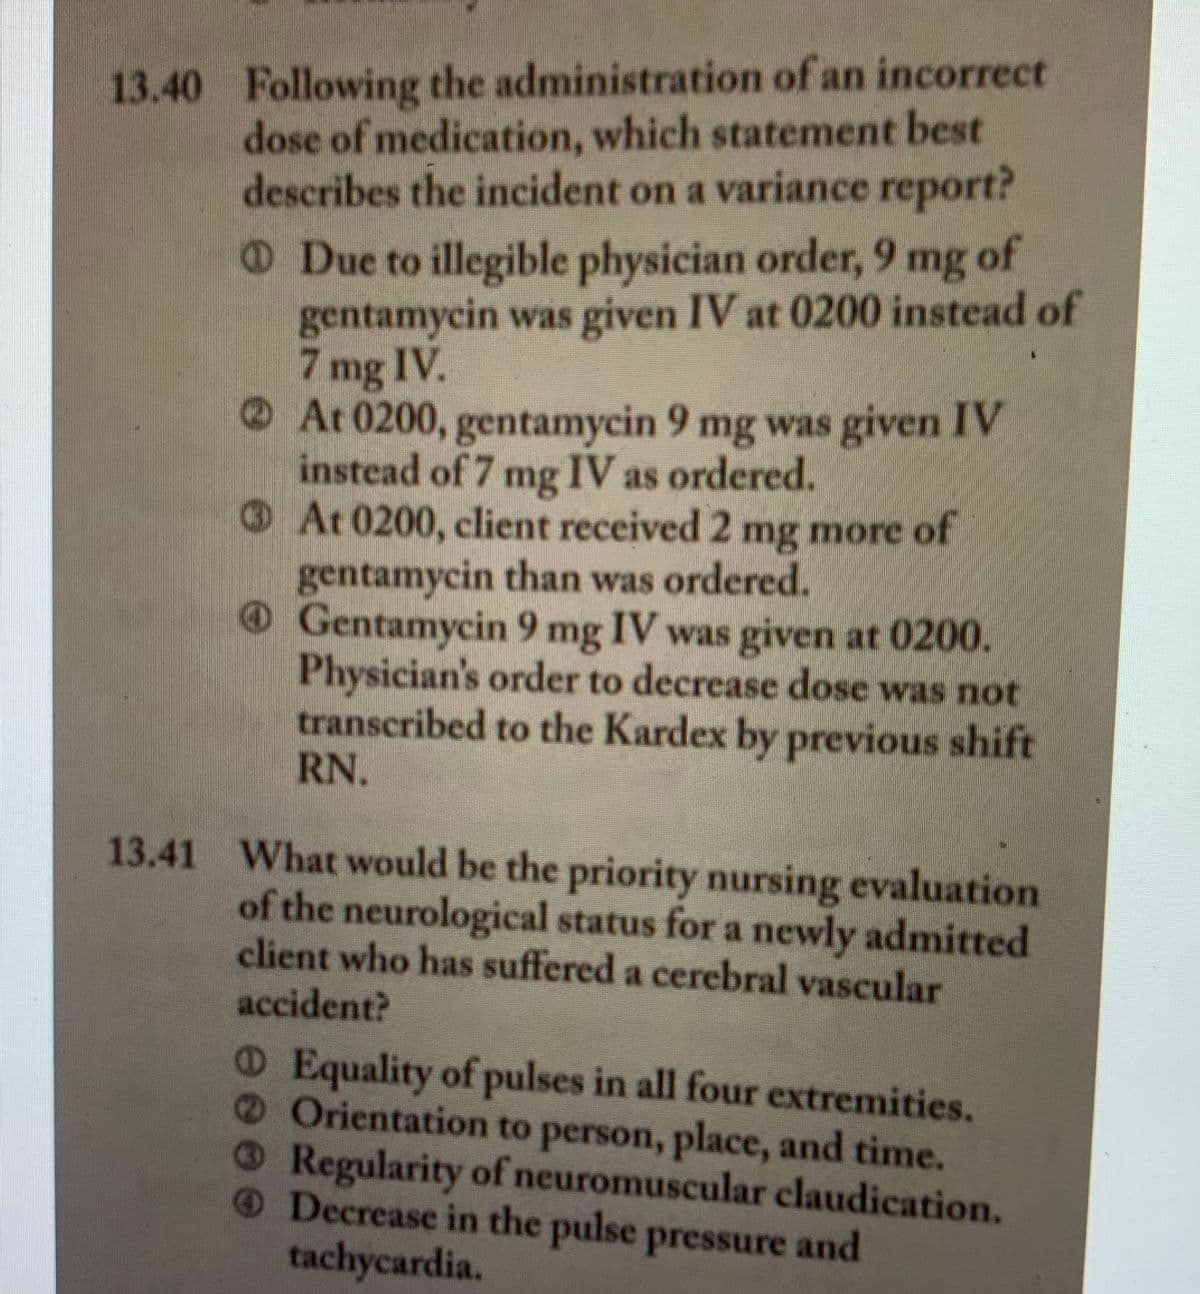 13.40 Following the administration of an incorrect
dose of medication, which statement best
describes the incident on a variance report?
of
O Due to illegible physician order, 9 mg
gentamycin was given IV at 0200 instead of
7 mg IV.
At 0200, gentamycin 9 mg was given IV
instead of 7 mg IV as ordered.
OAt 0200, client received 2 more
mg
of
gentamycin than was ordered.
Gentamycin 9 mg IV was given at 0200.
Physician's order to decrease dose was not
transcribed to the Kardex by previous shift
RN.
13.41 What would be the priority nursing evaluation
of the neurological status for a newly admitted
client who has suffered a cerebral vascular
accident?
O Equality of pulses in all four extremities.
1 Orientation to person, place, and time.
ORegularity of neuromuscular claudication.
ODecrease in the pulse pressure and
tachycardia.
